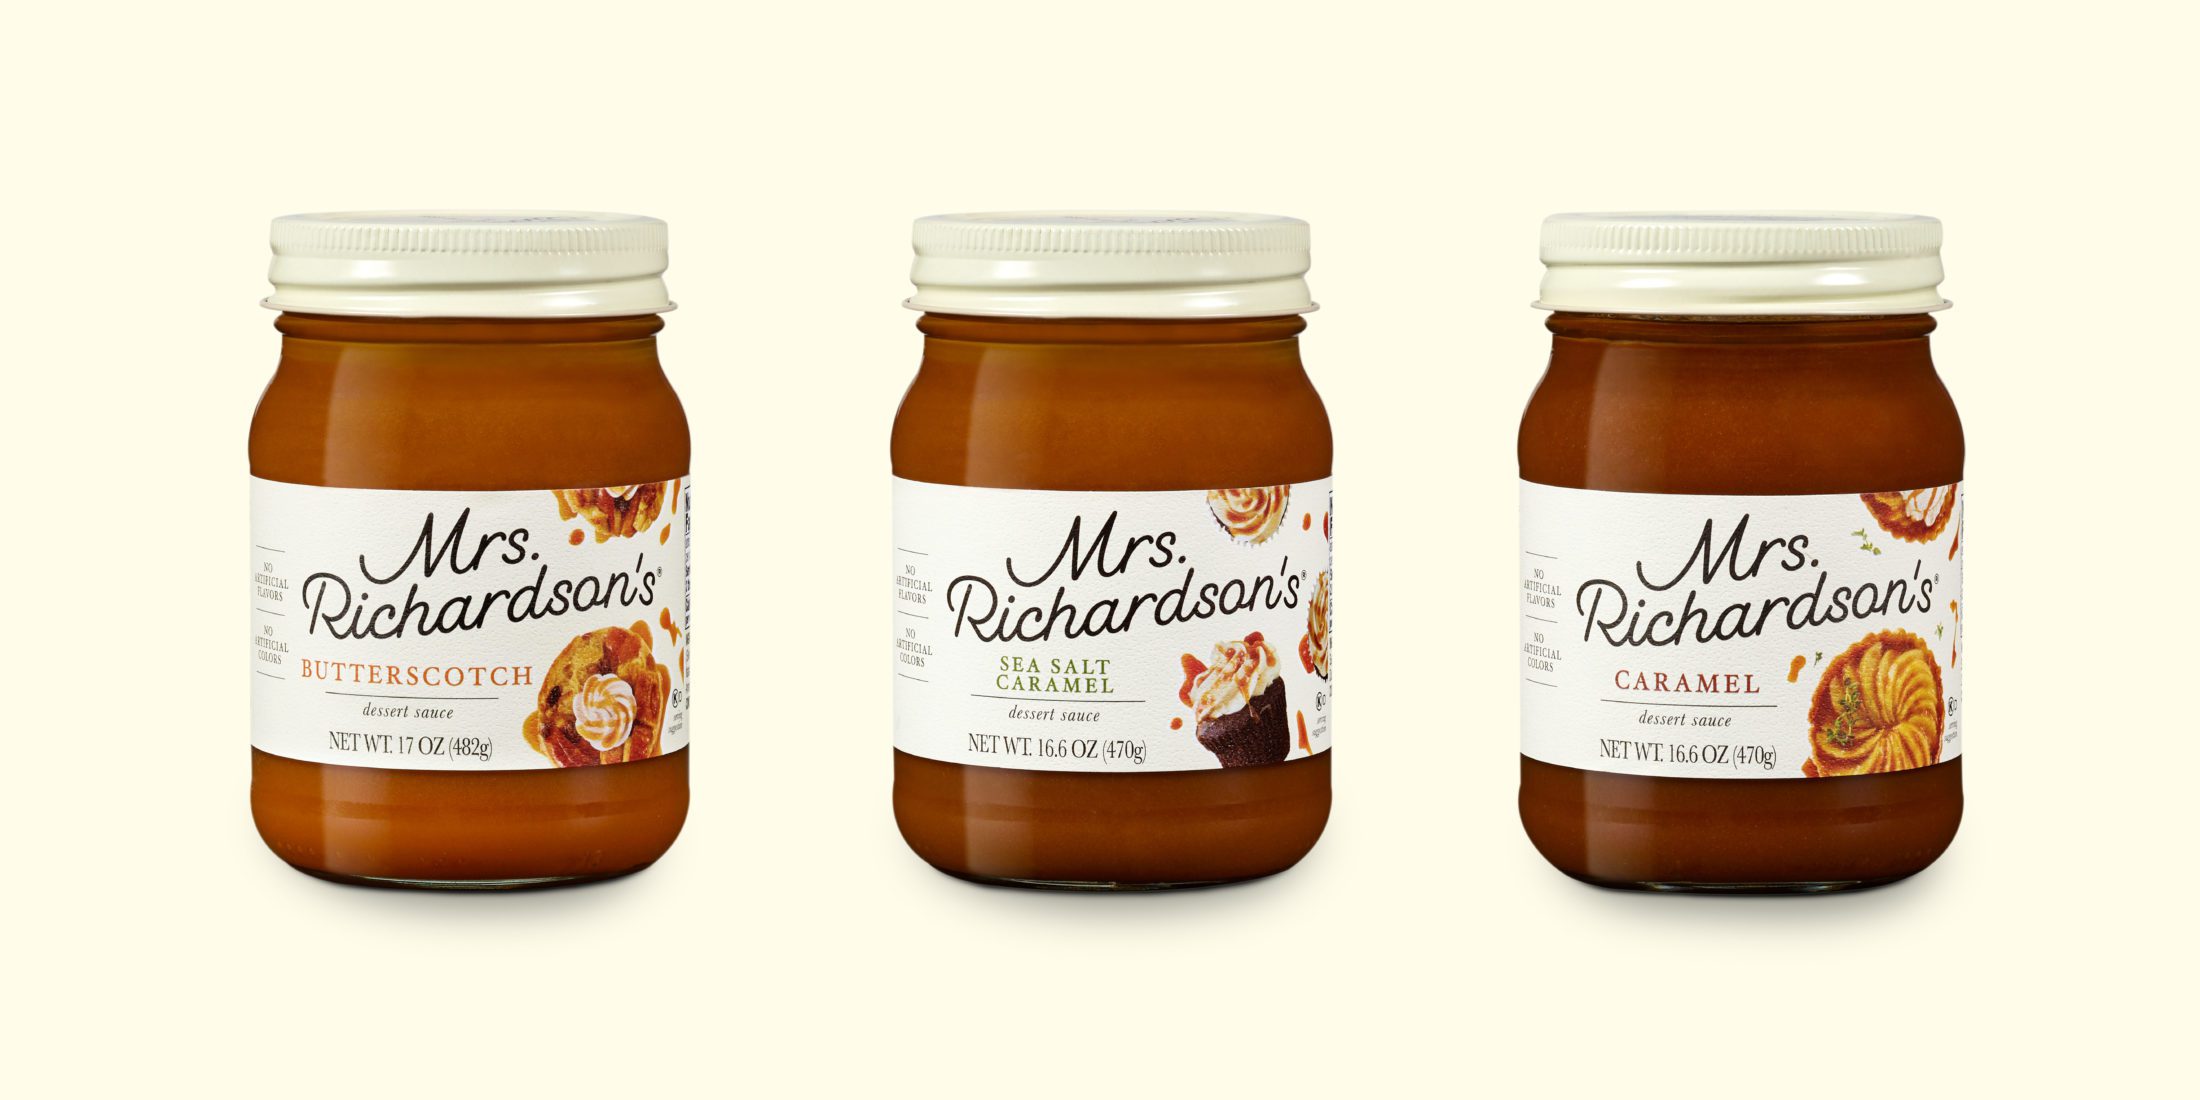 Three jars of Mrs. Richardson's Dessert Sauces lined up on a cream-colored background. Flavors from left to right, Butterscotch, Sea Salt Caramel, and Caramel.